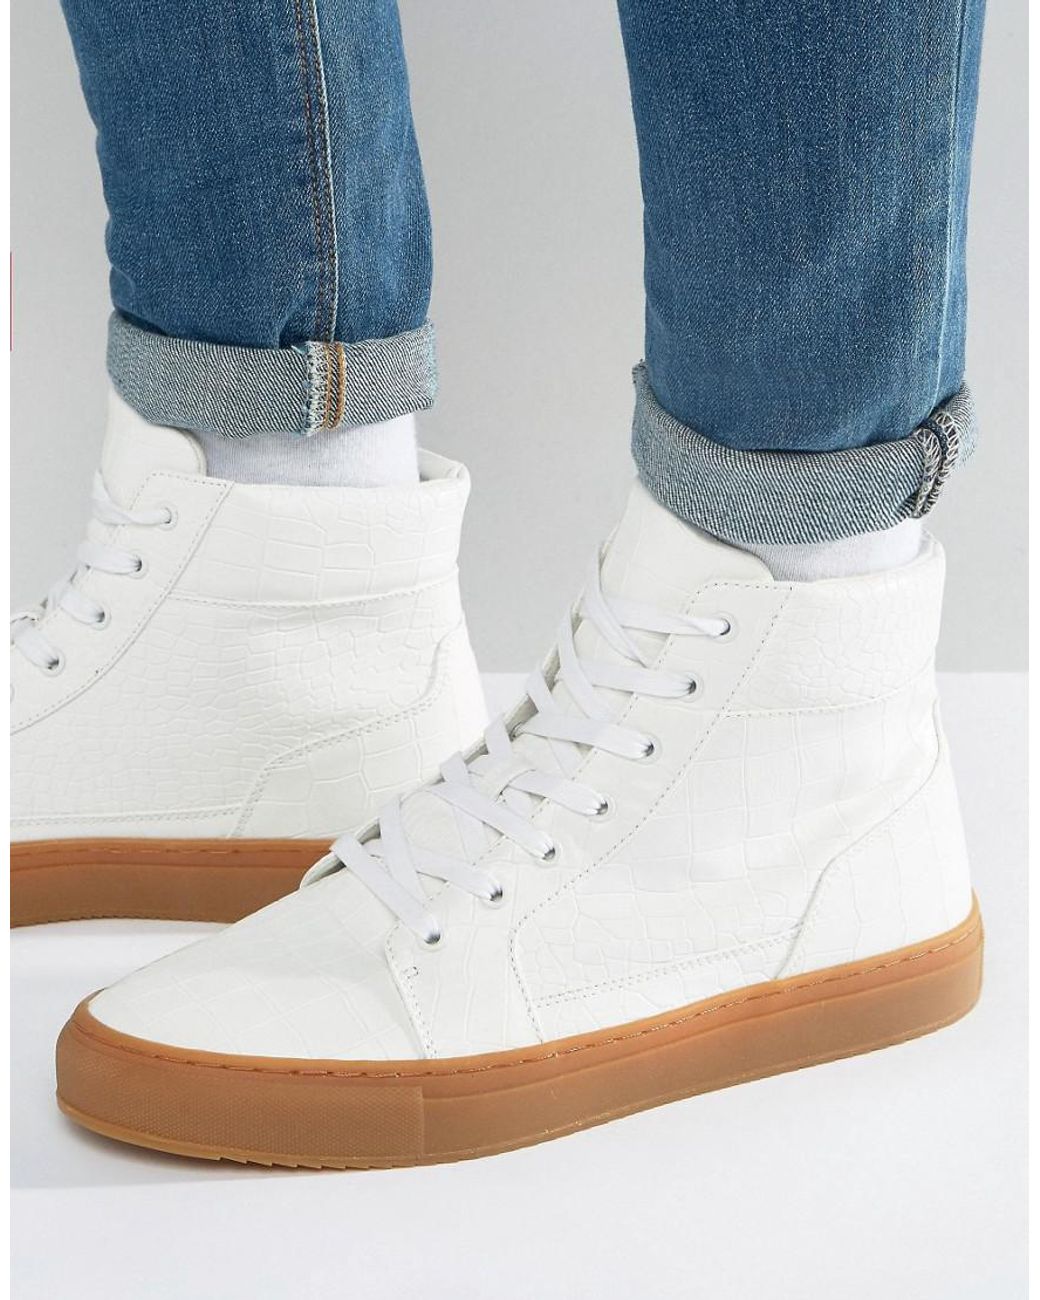 asos white high top sneakers in white with gum sole